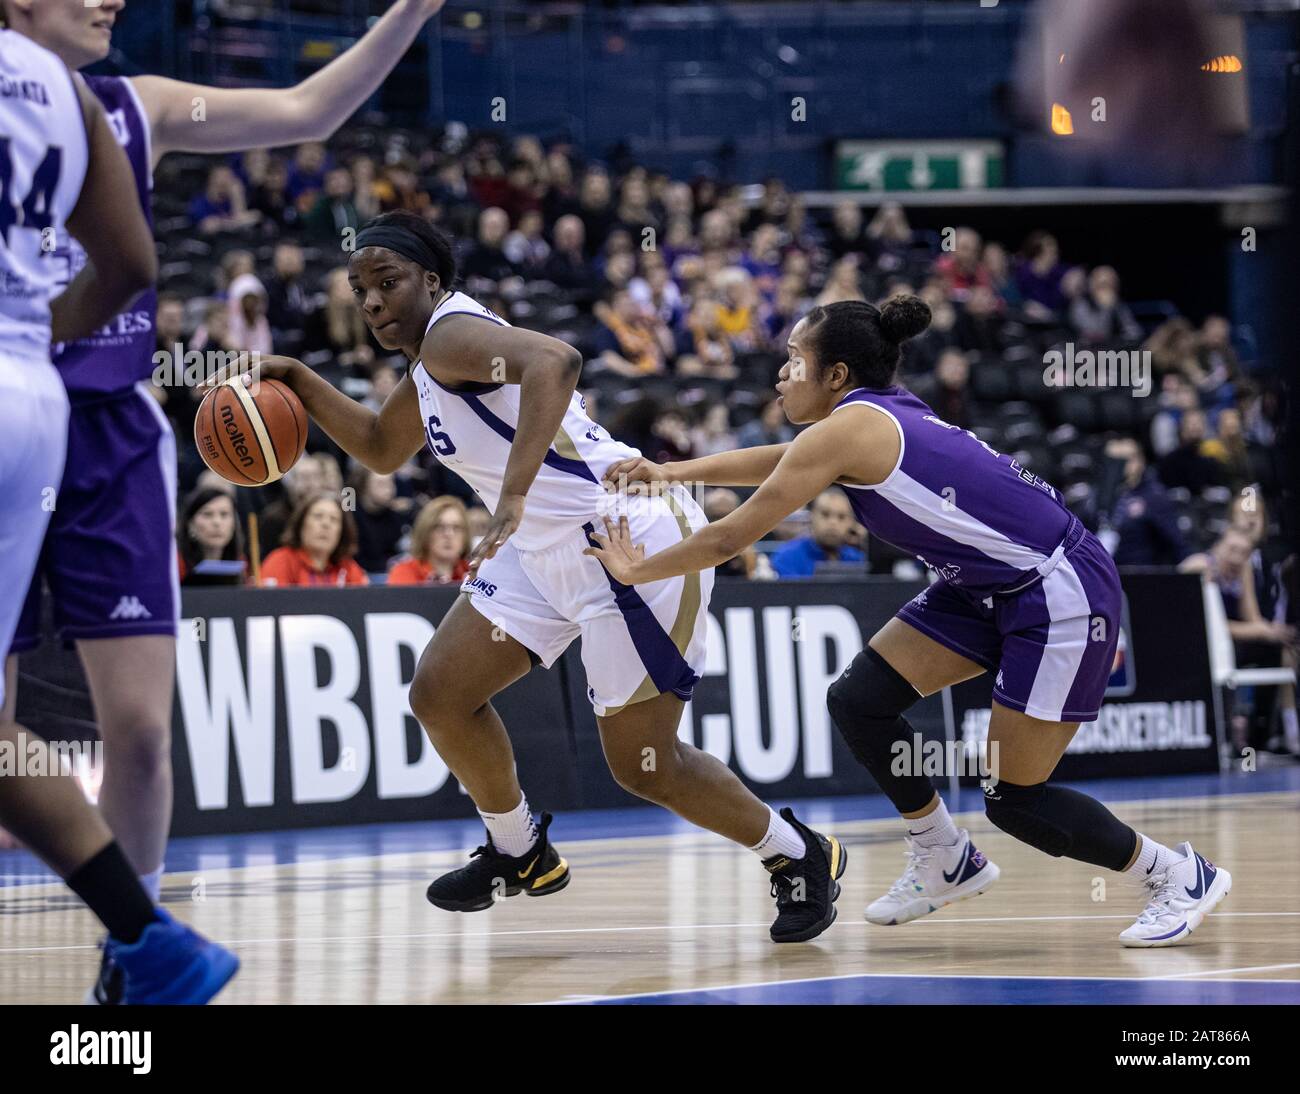 Birmingham, UK, 26 January, 2020.  Sevenoaks Suns defeat Durham Palatinates, 74-64 to win the WBBL cup at Arena Birmingham, Birmingham UK. Suns' Janice Monakana with the ball, Durham's Nicolette Fyong Lyew Quee in pursuit. copyright Carol Moir. Stock Photo